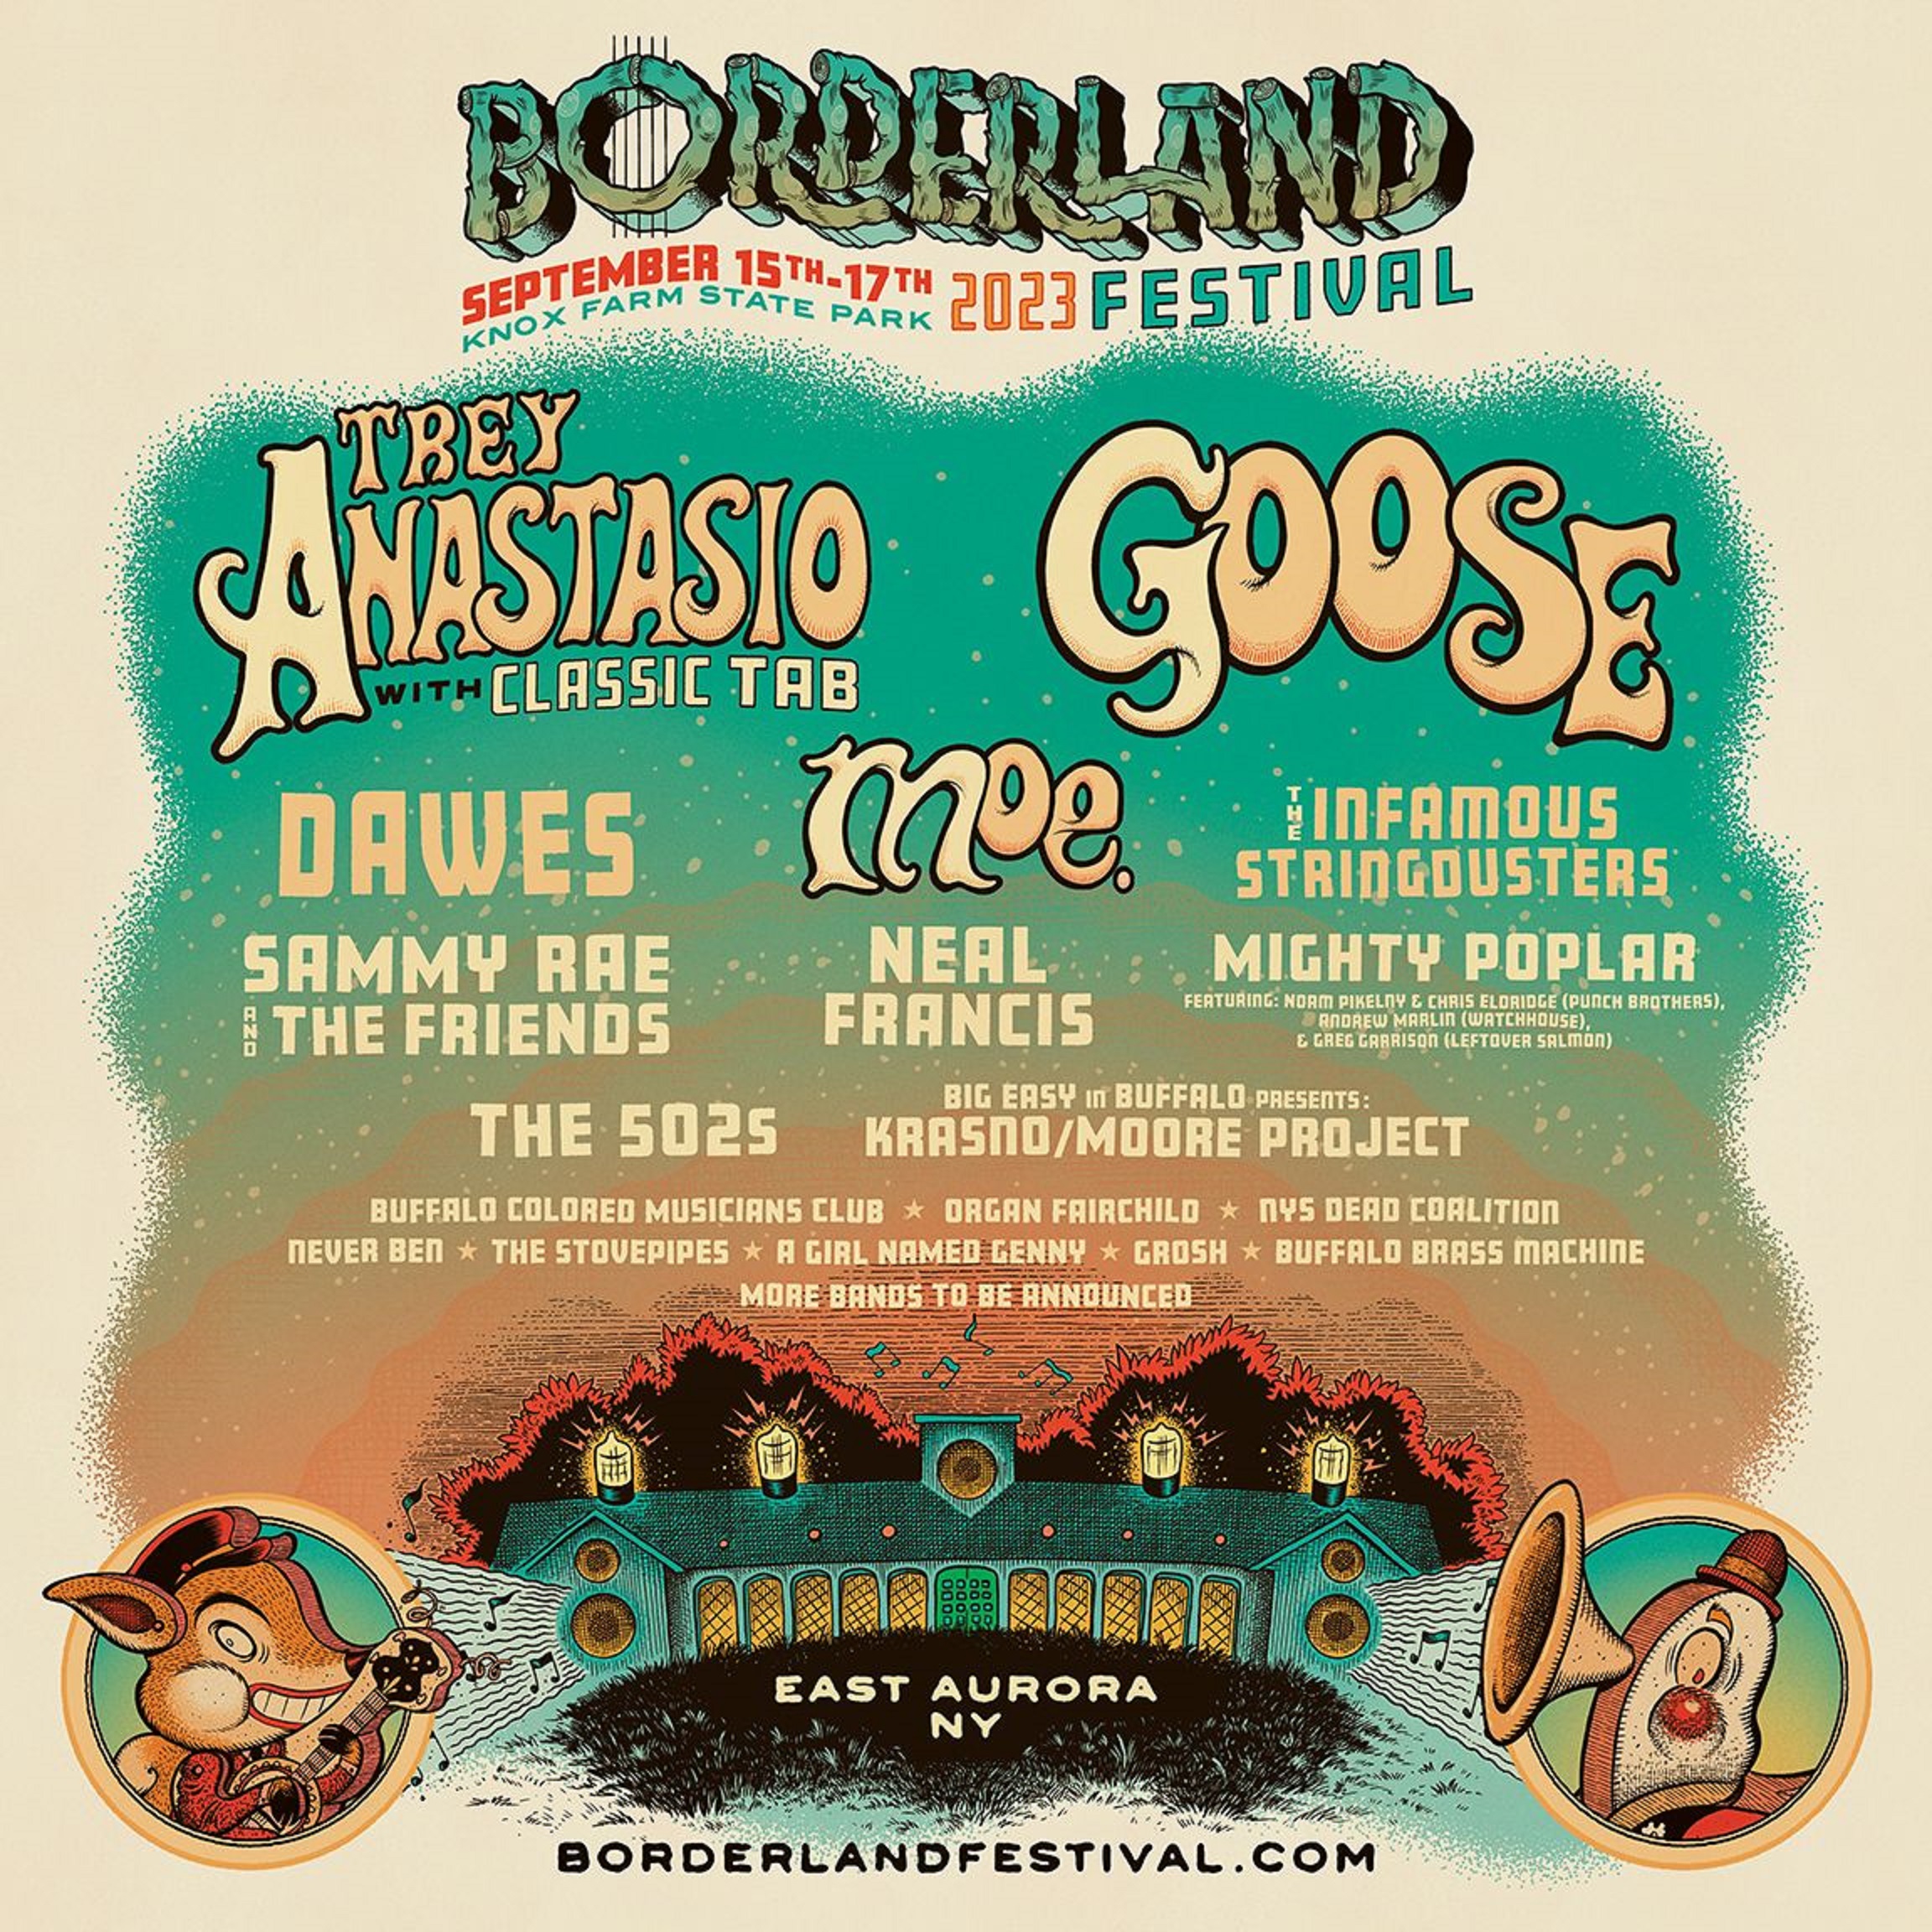 BORDERLAND FESTIVAL RETURNS with Trey Anastasio Band, Goose, Moe., and much more!